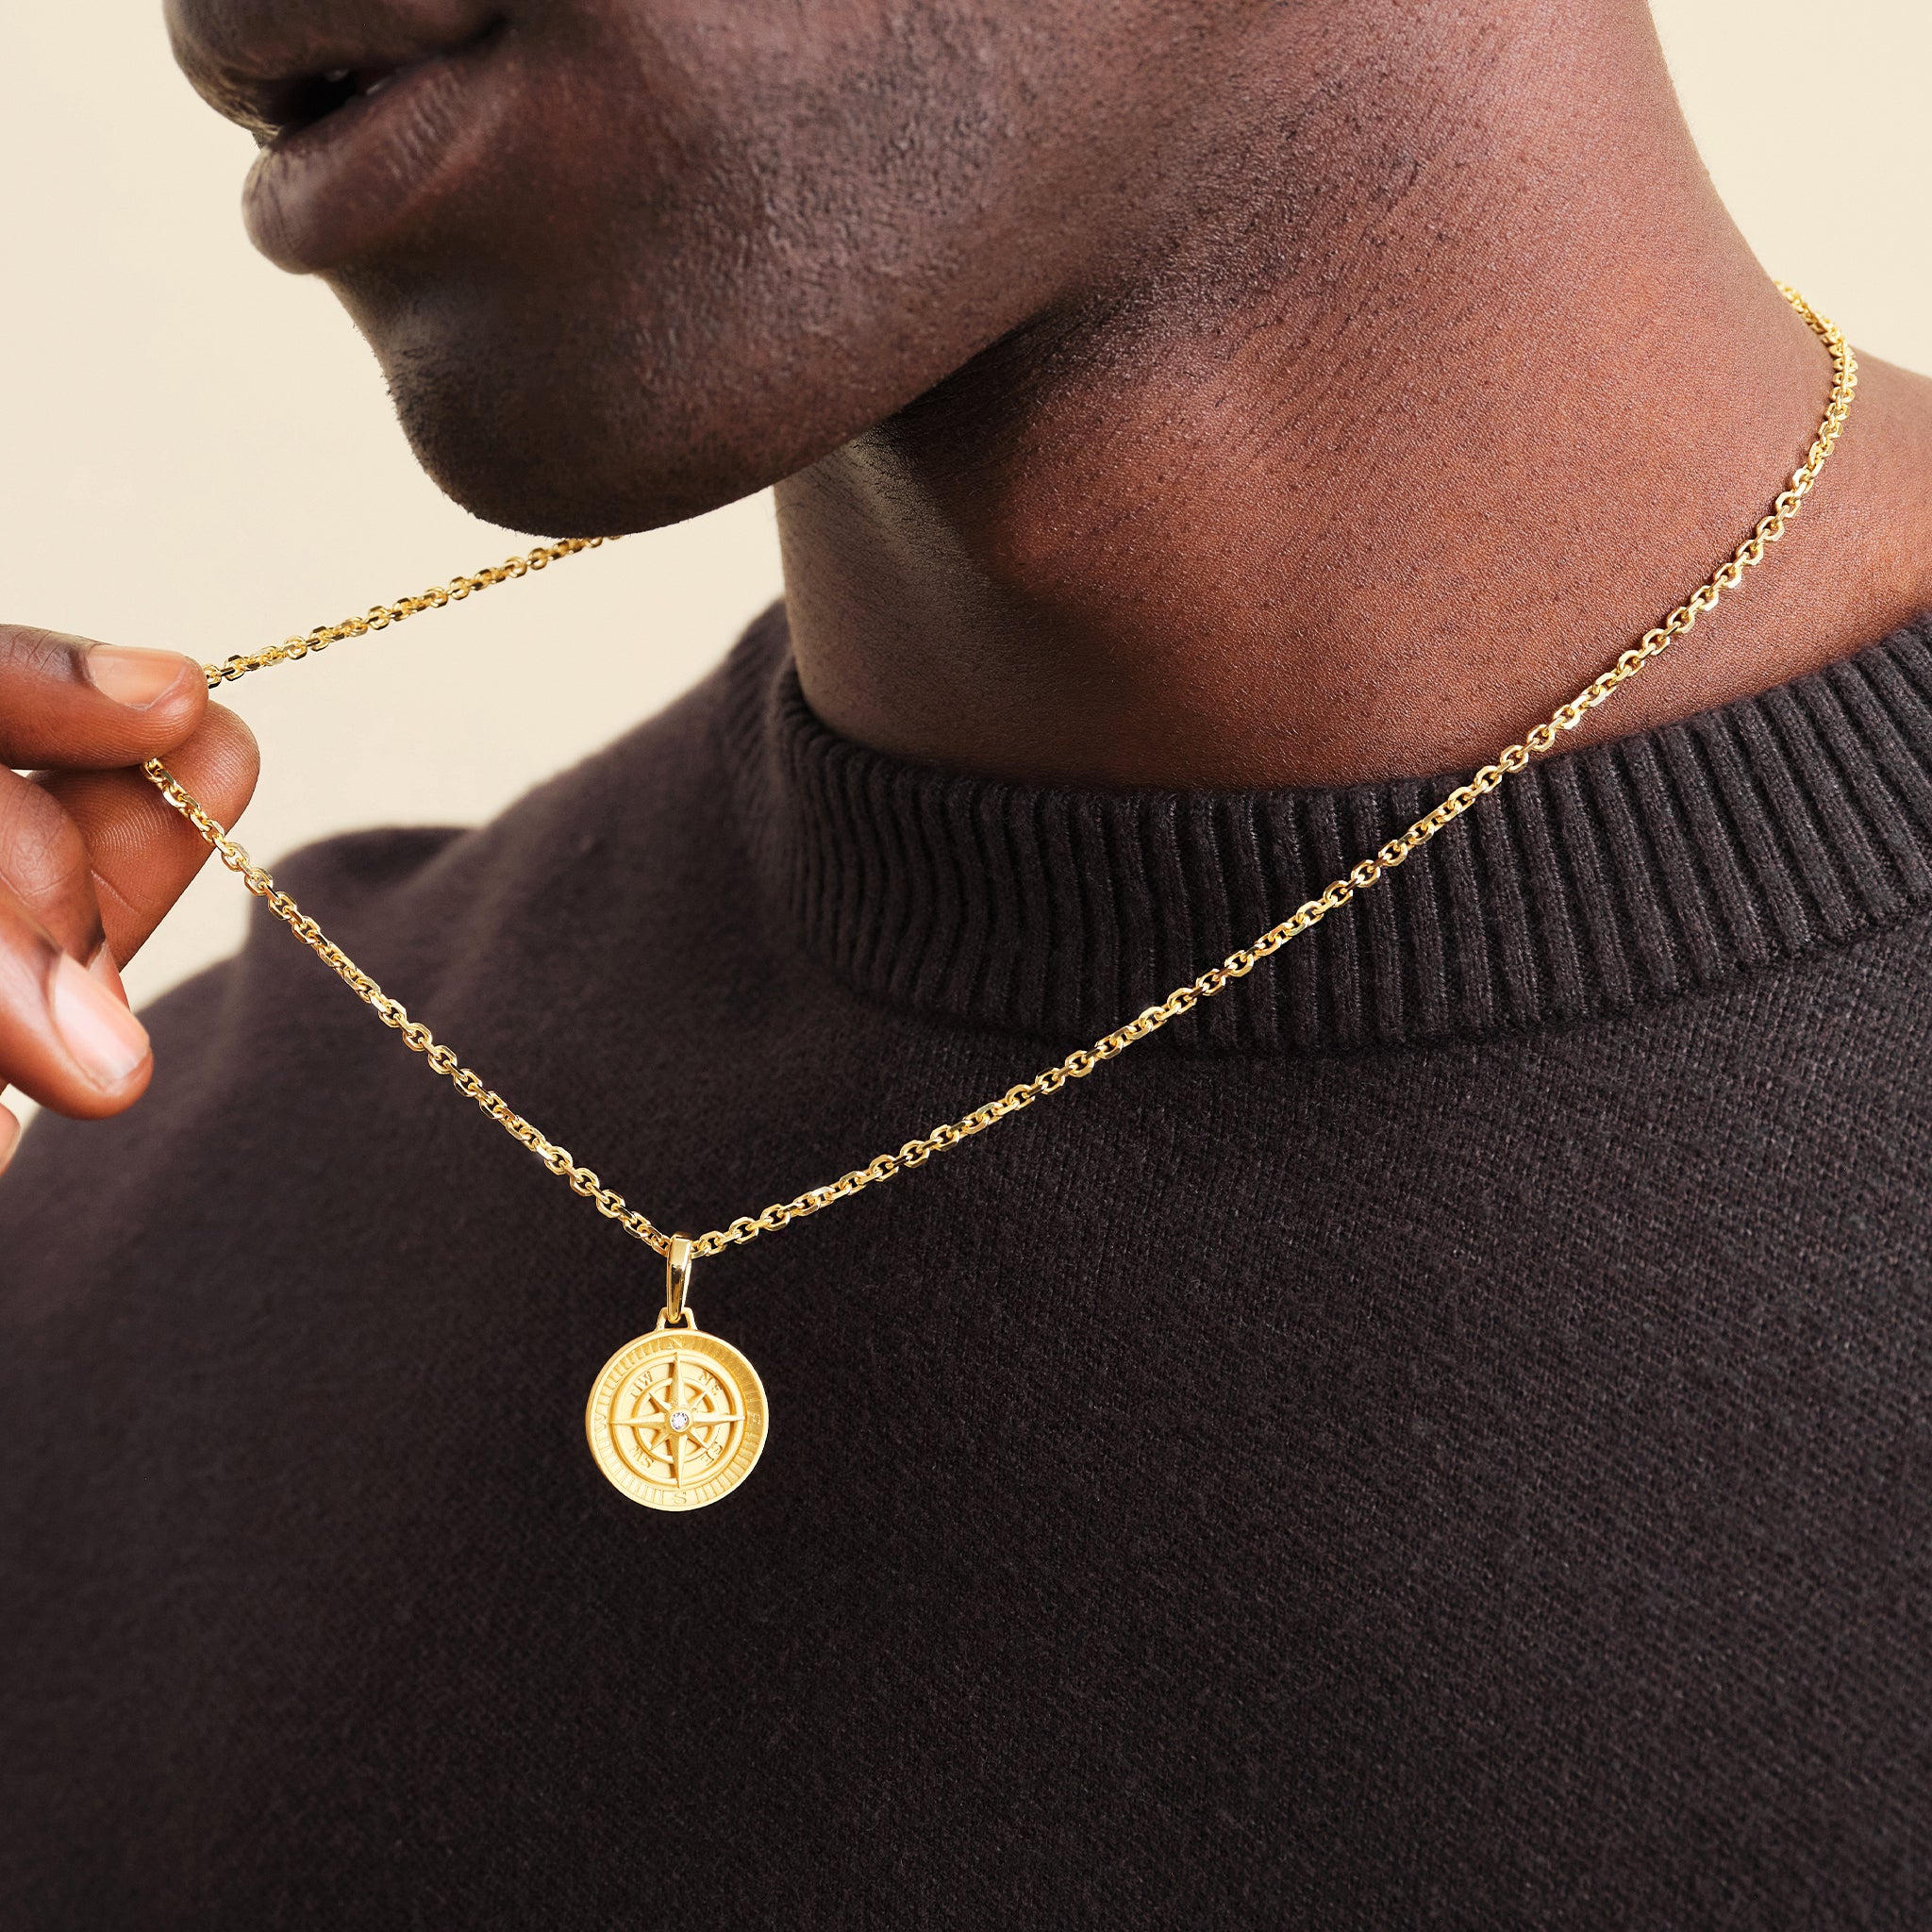 Lost Souls stainless steel Compass pendant necklace in gold | ASOS